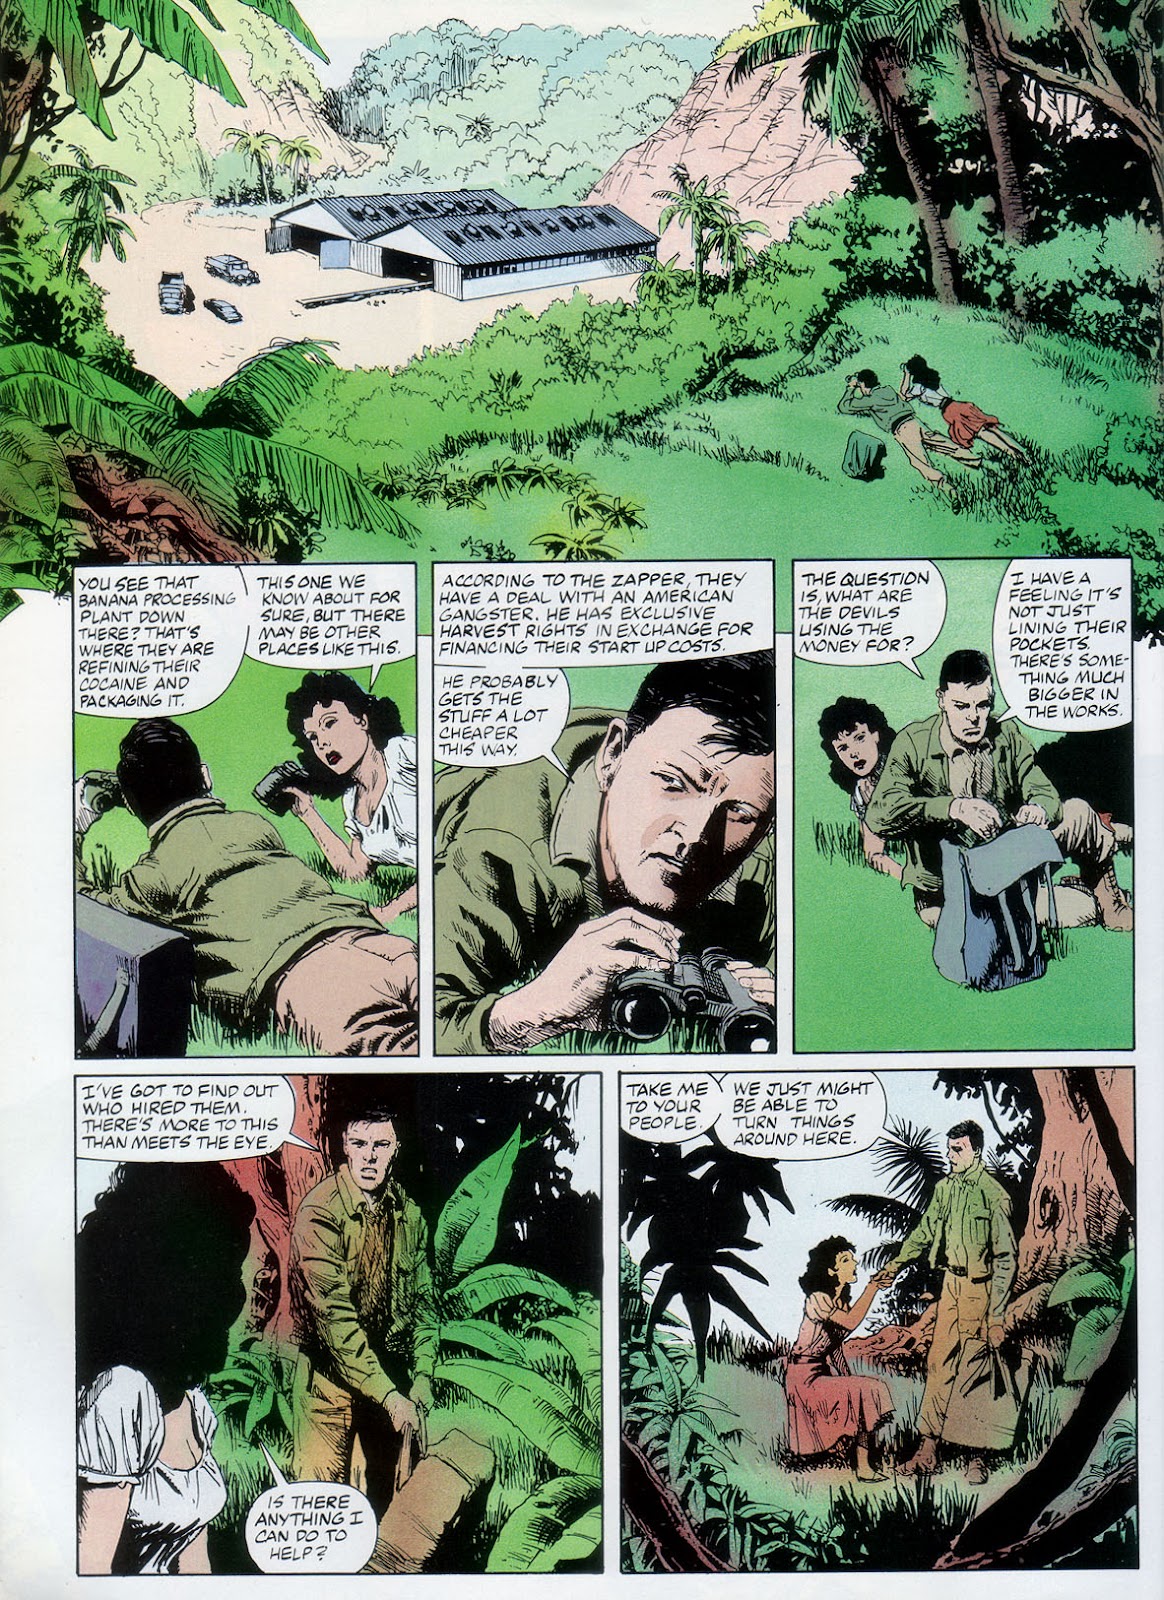 Marvel Graphic Novel issue 57 - Rick Mason - The Agent - Page 48